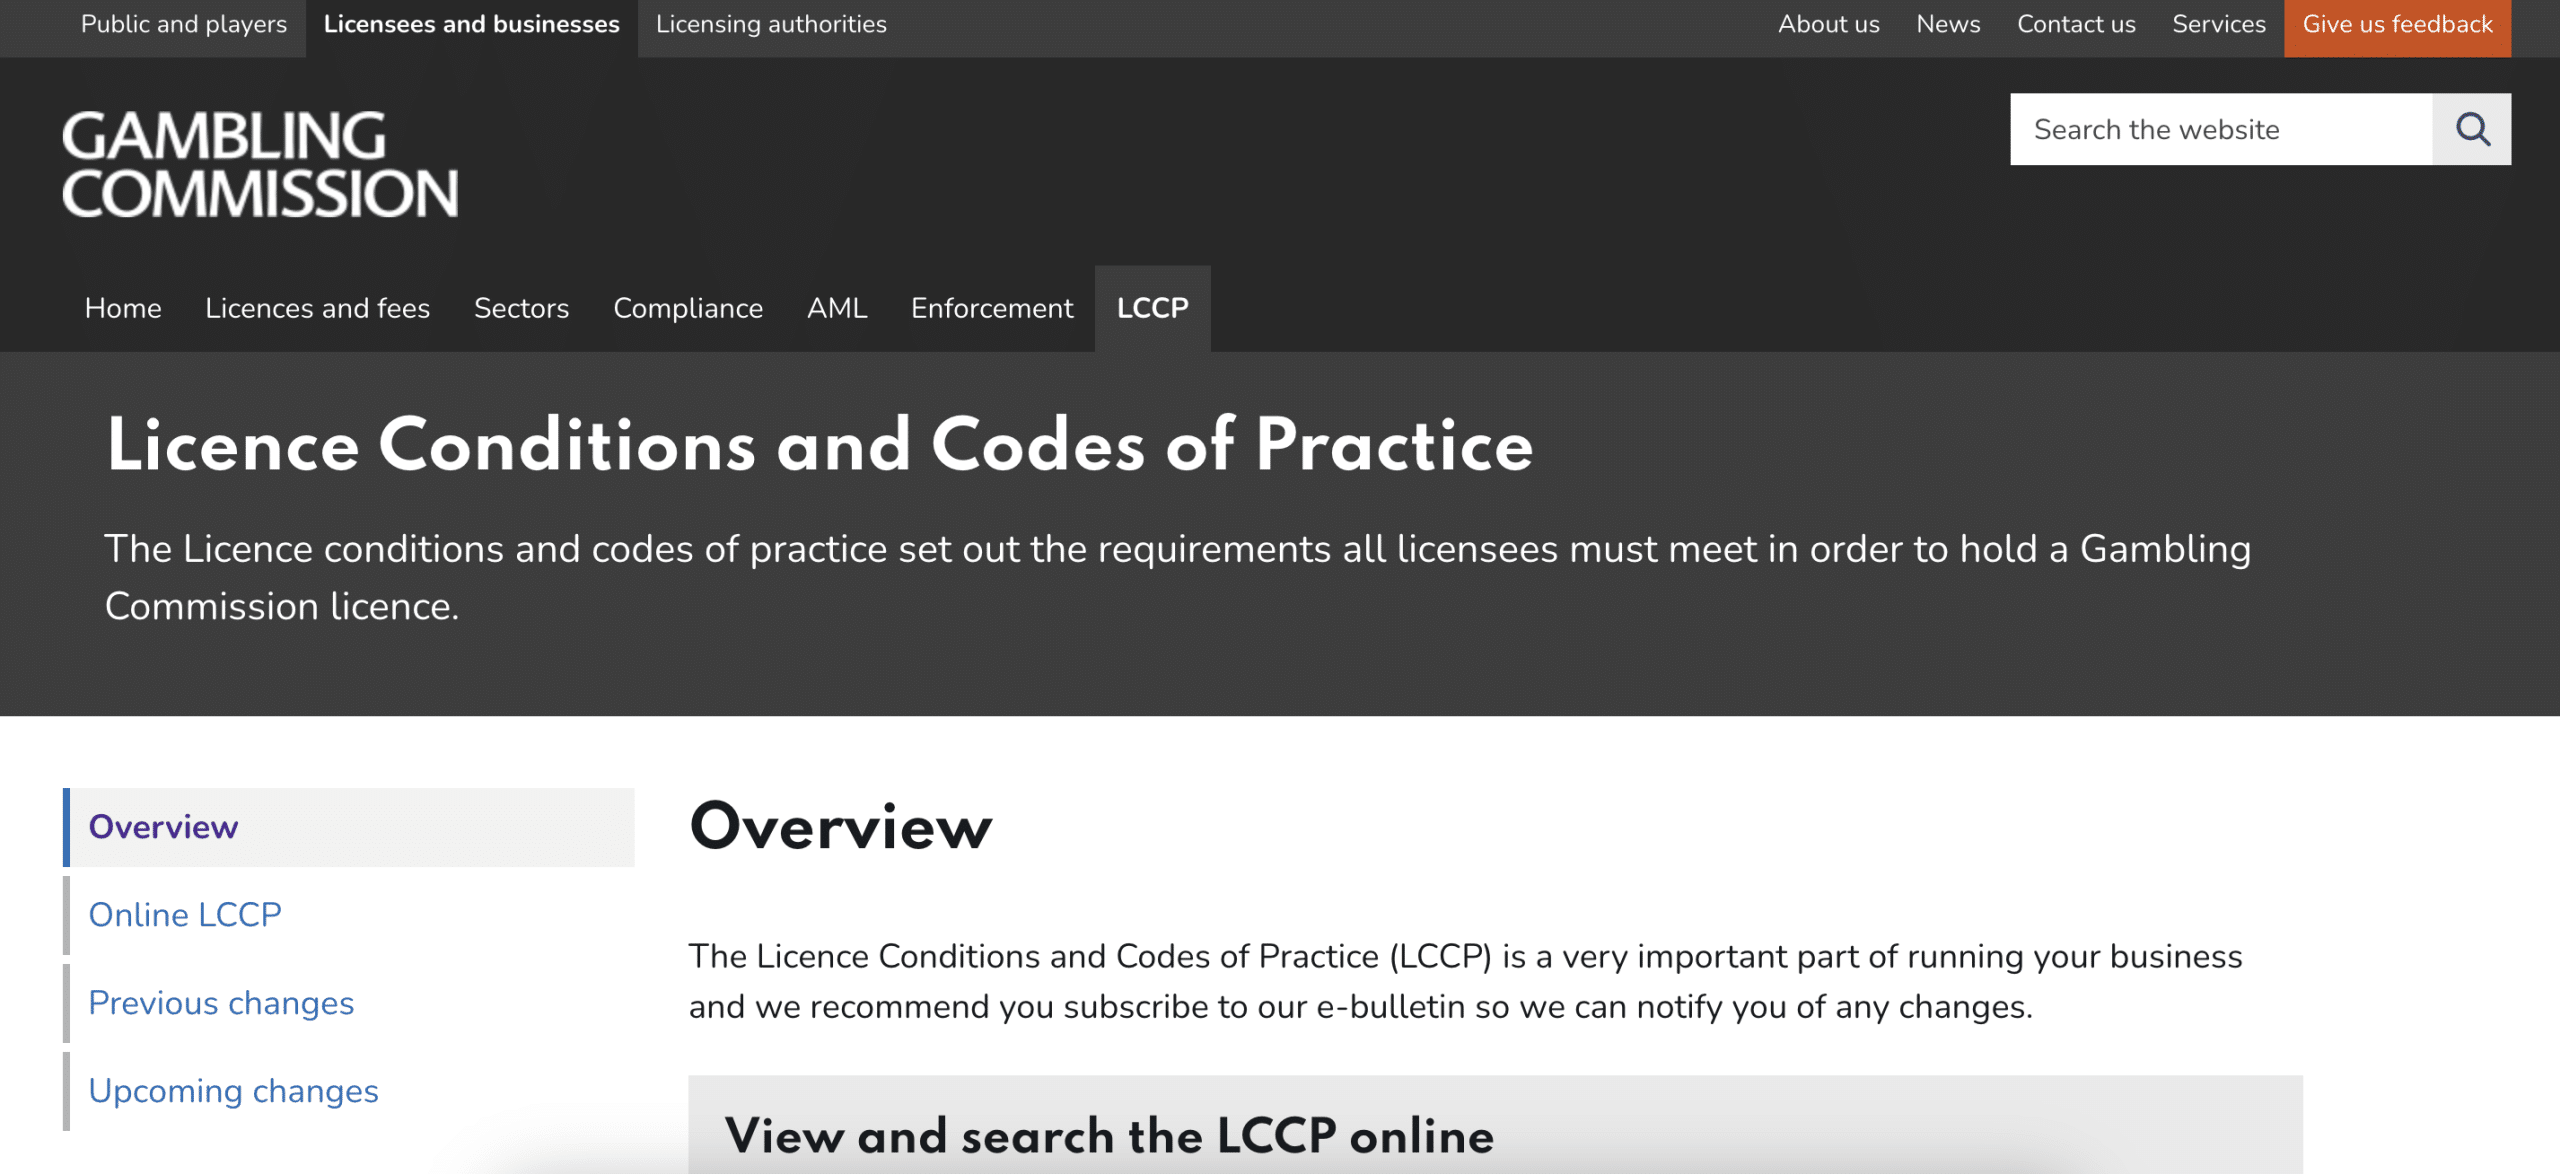 Gambling Commission's Licence Conditions and Codes of Practice.